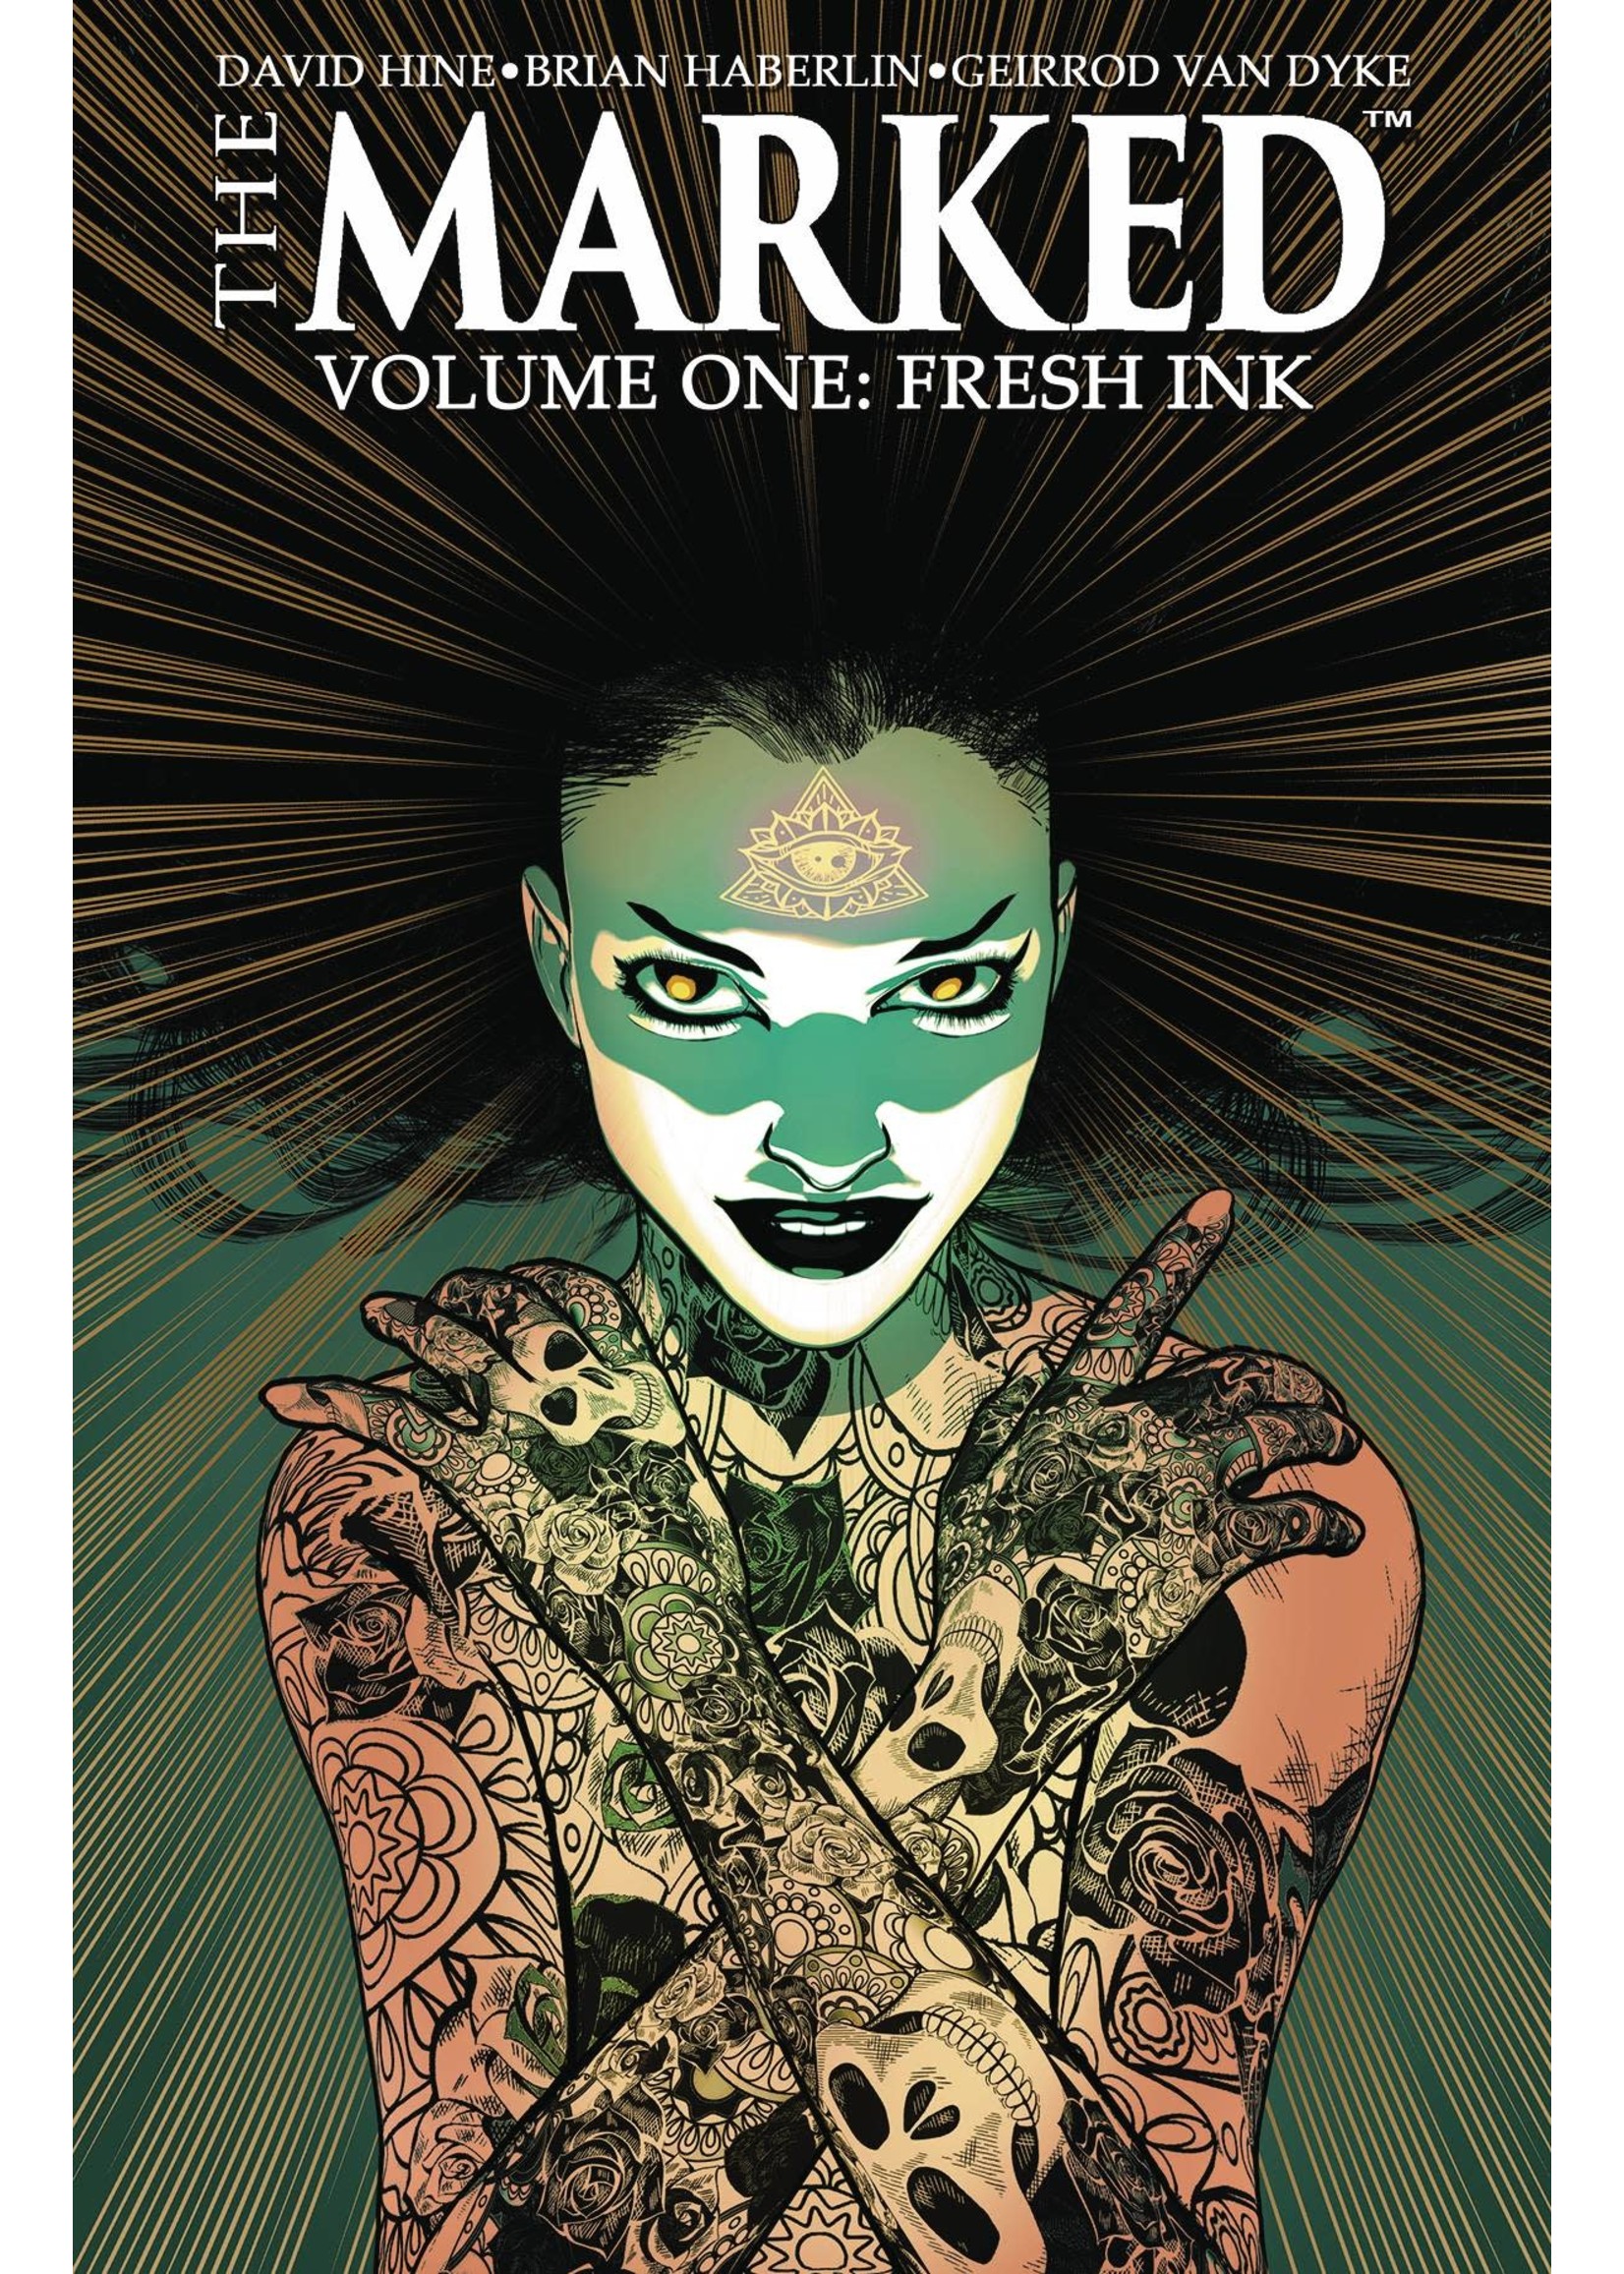 The Marked Vol 01: Fresh Ink